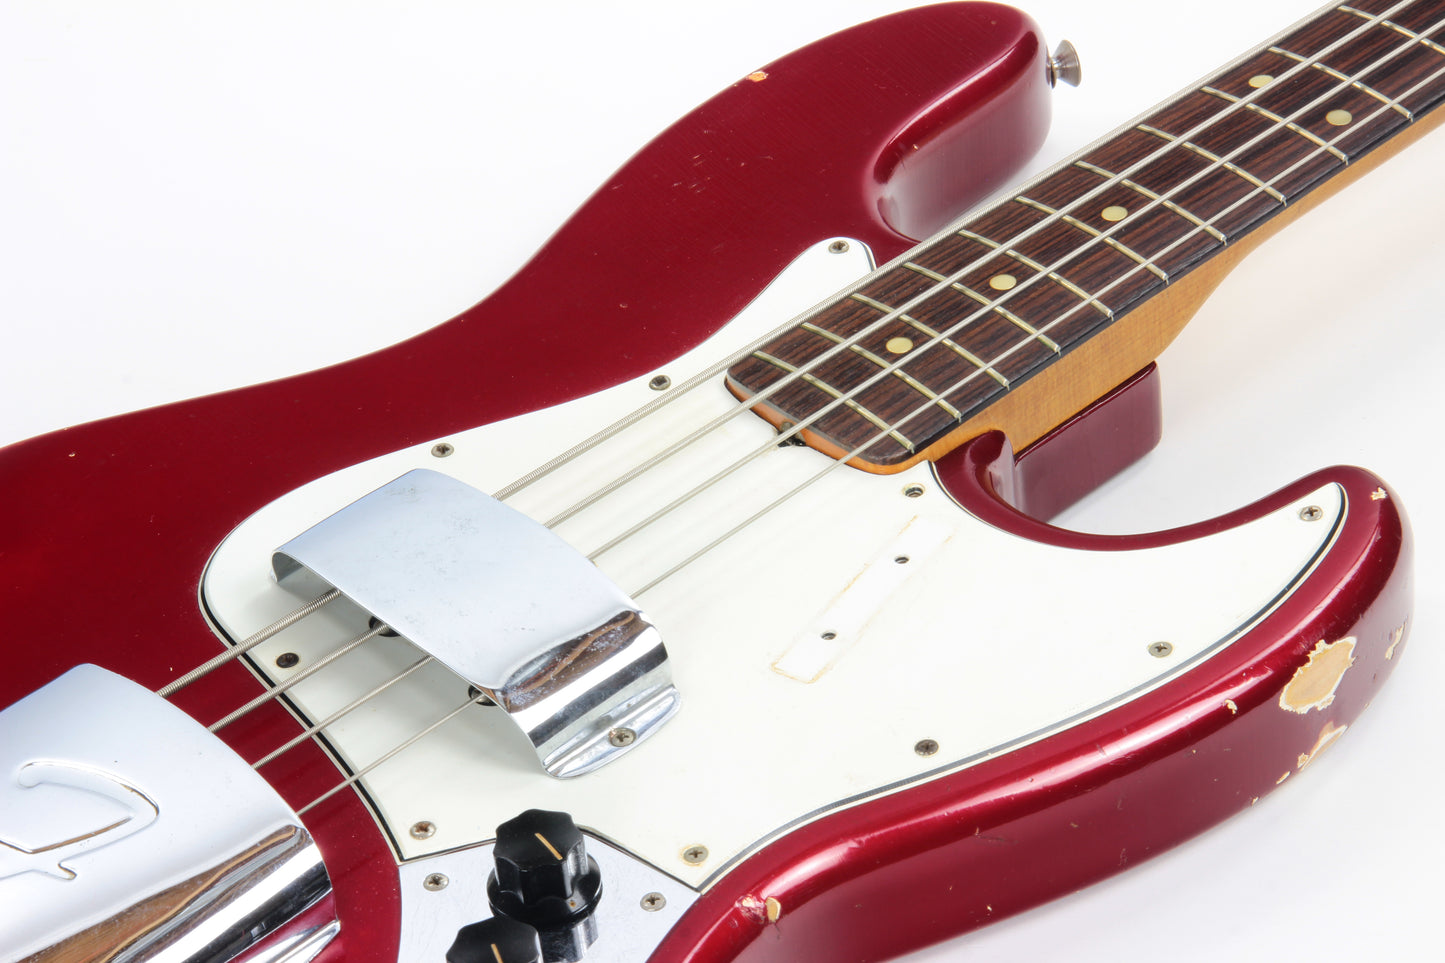 1965 Fender Jazz Bass Candy Apple Red Custom Color - No Binding, Dot Inlays, Matching Headstock!